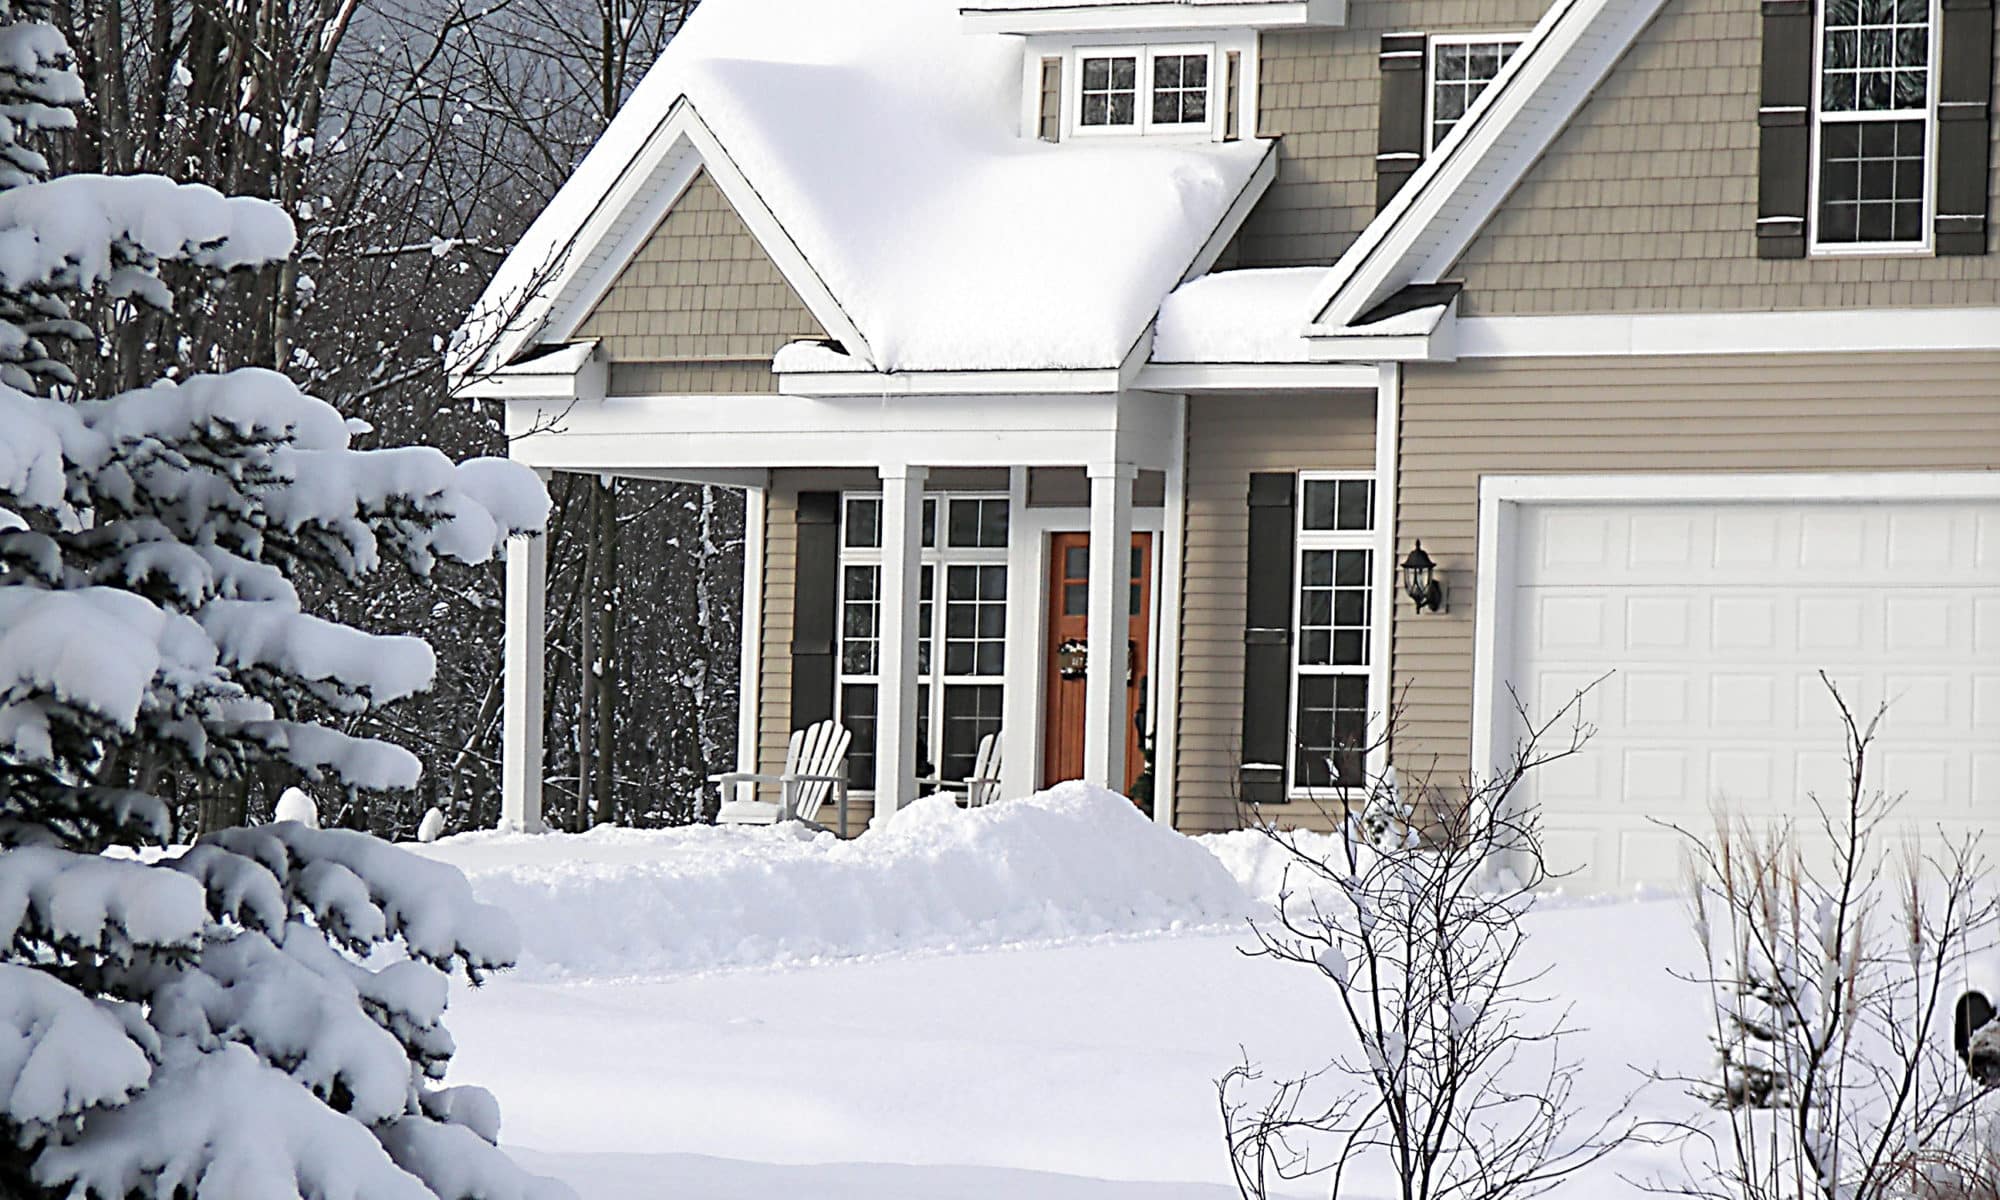 Siding Meets Snow: How to Protect Exterior Panel Against Weather Damage